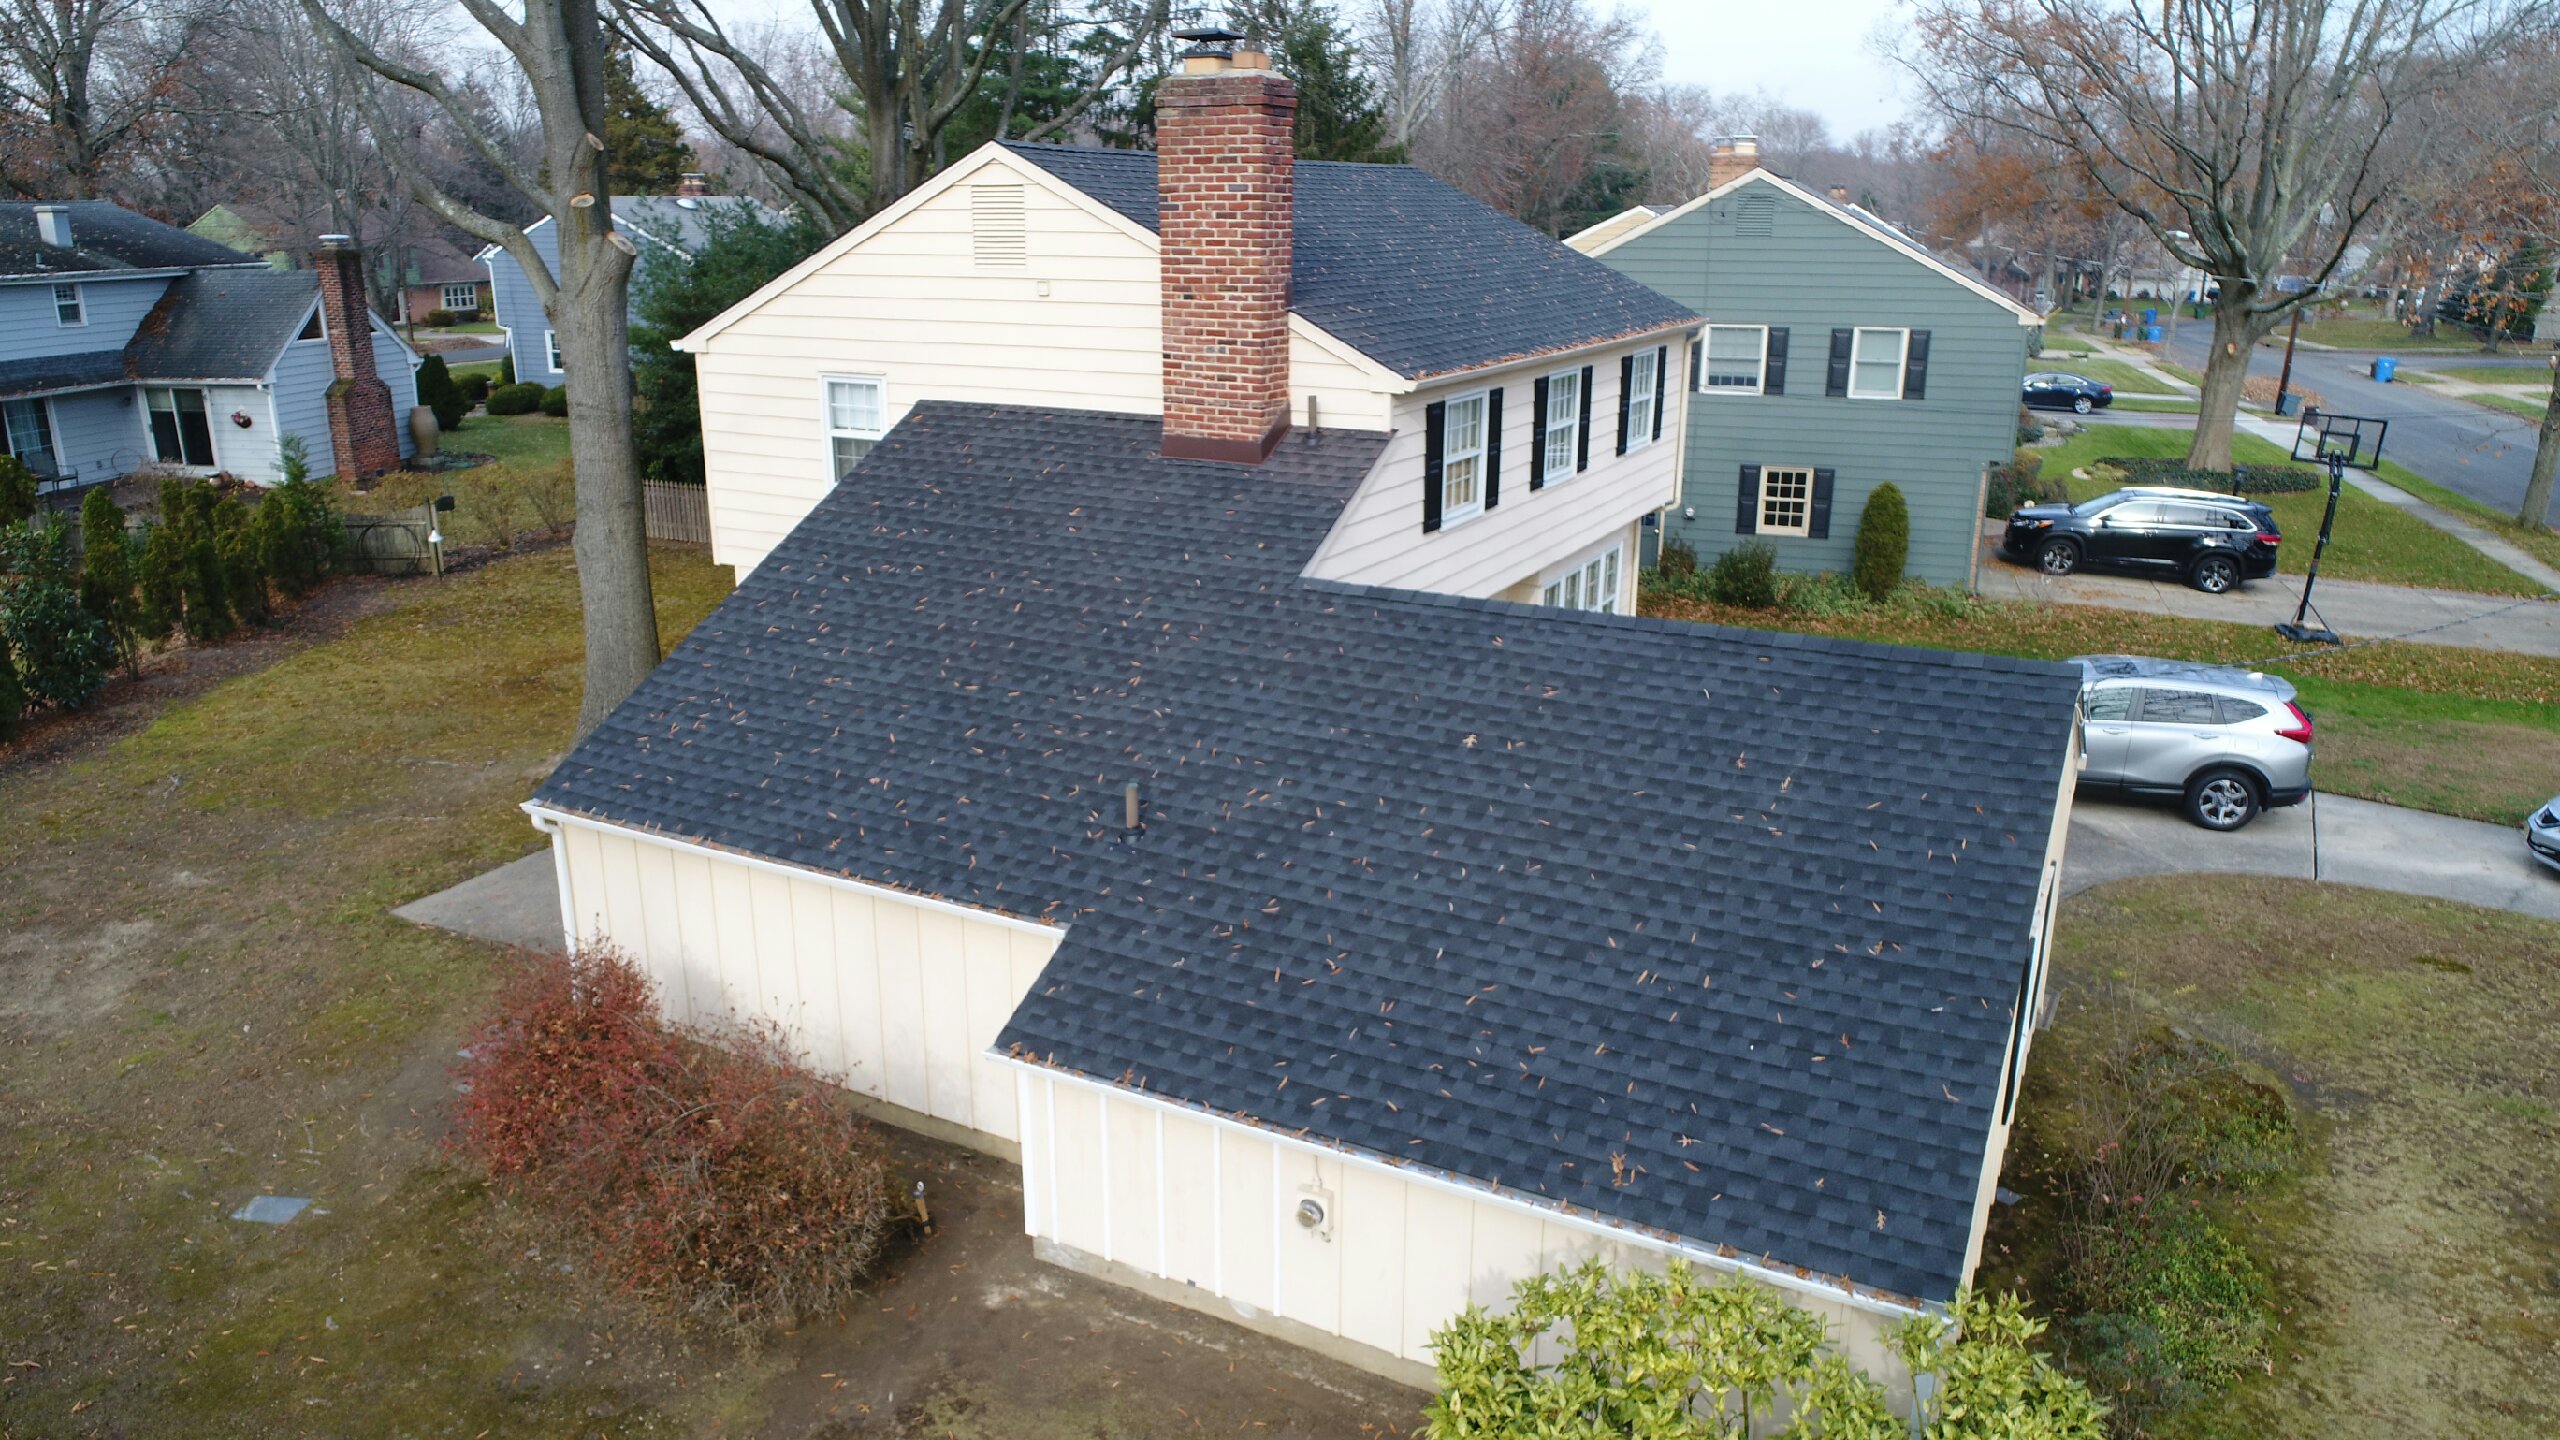 gaf-timberline-hd-lifetime-roofing-system-with-pewter-gray-shingles